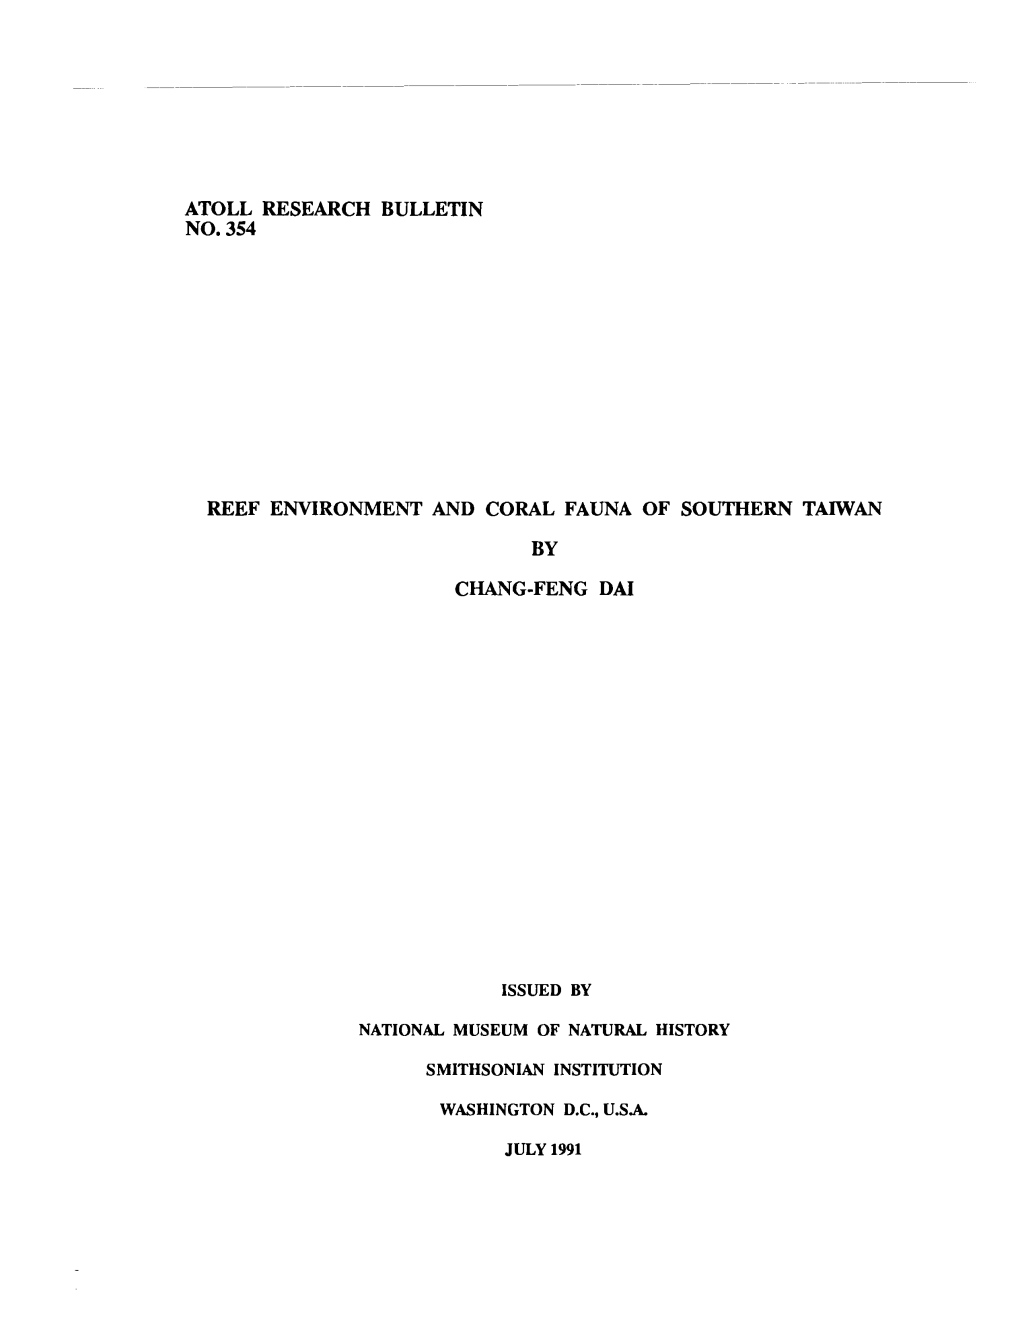 Atoll Research Bulletin No. 354 Reef Environment And